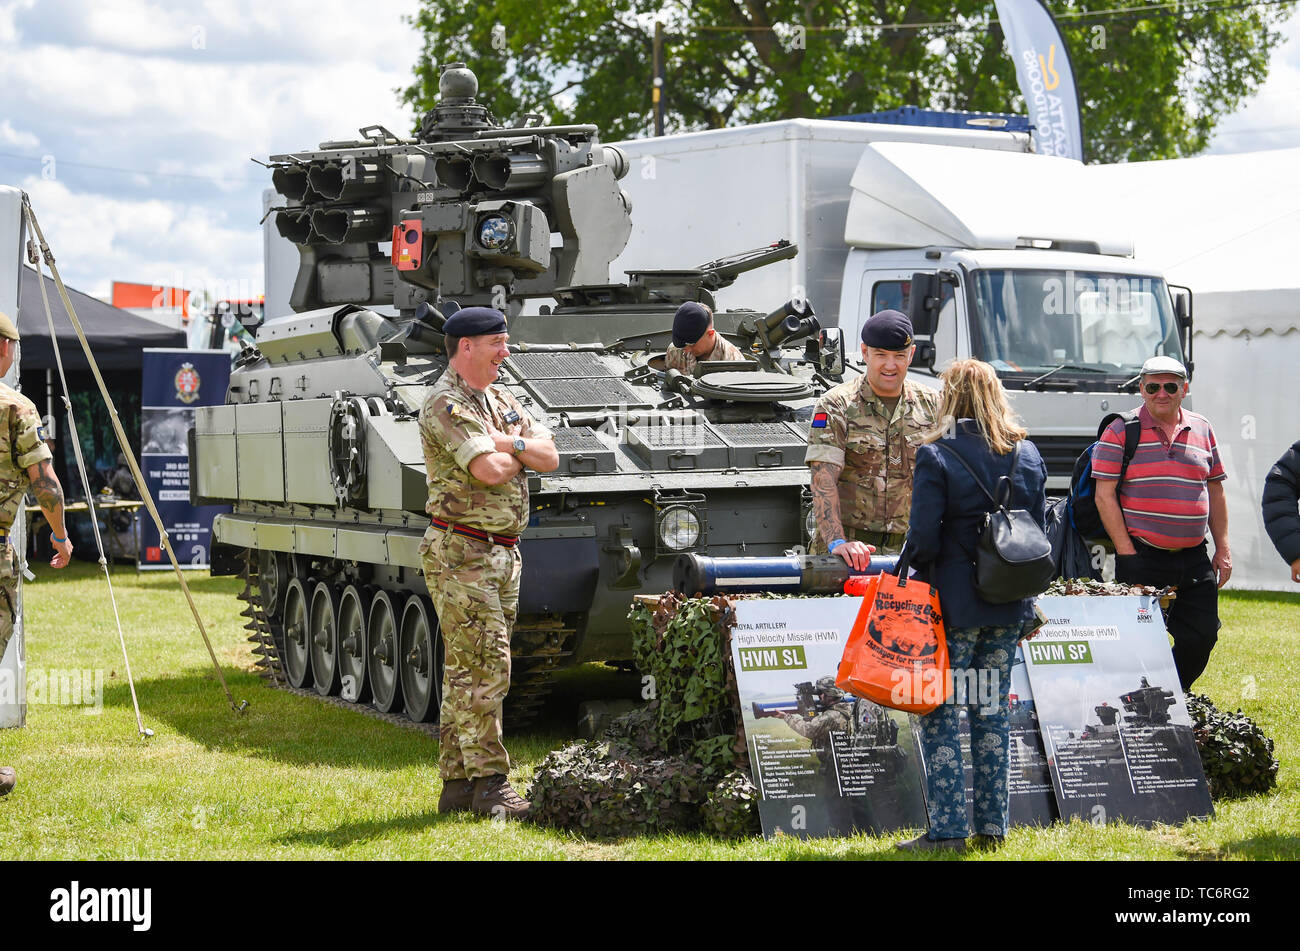 Ardingly Sussex UK 6th June 2019 - The army stand enjoy the sunshine on the first day of the South of England Show held at the Ardingly Showground in Sussex. The annual agricultural show highlights the best in British farming and produce and attracts thousands of visitors over three days . Credit : Simon Dack / Alamy Live News Stock Photo